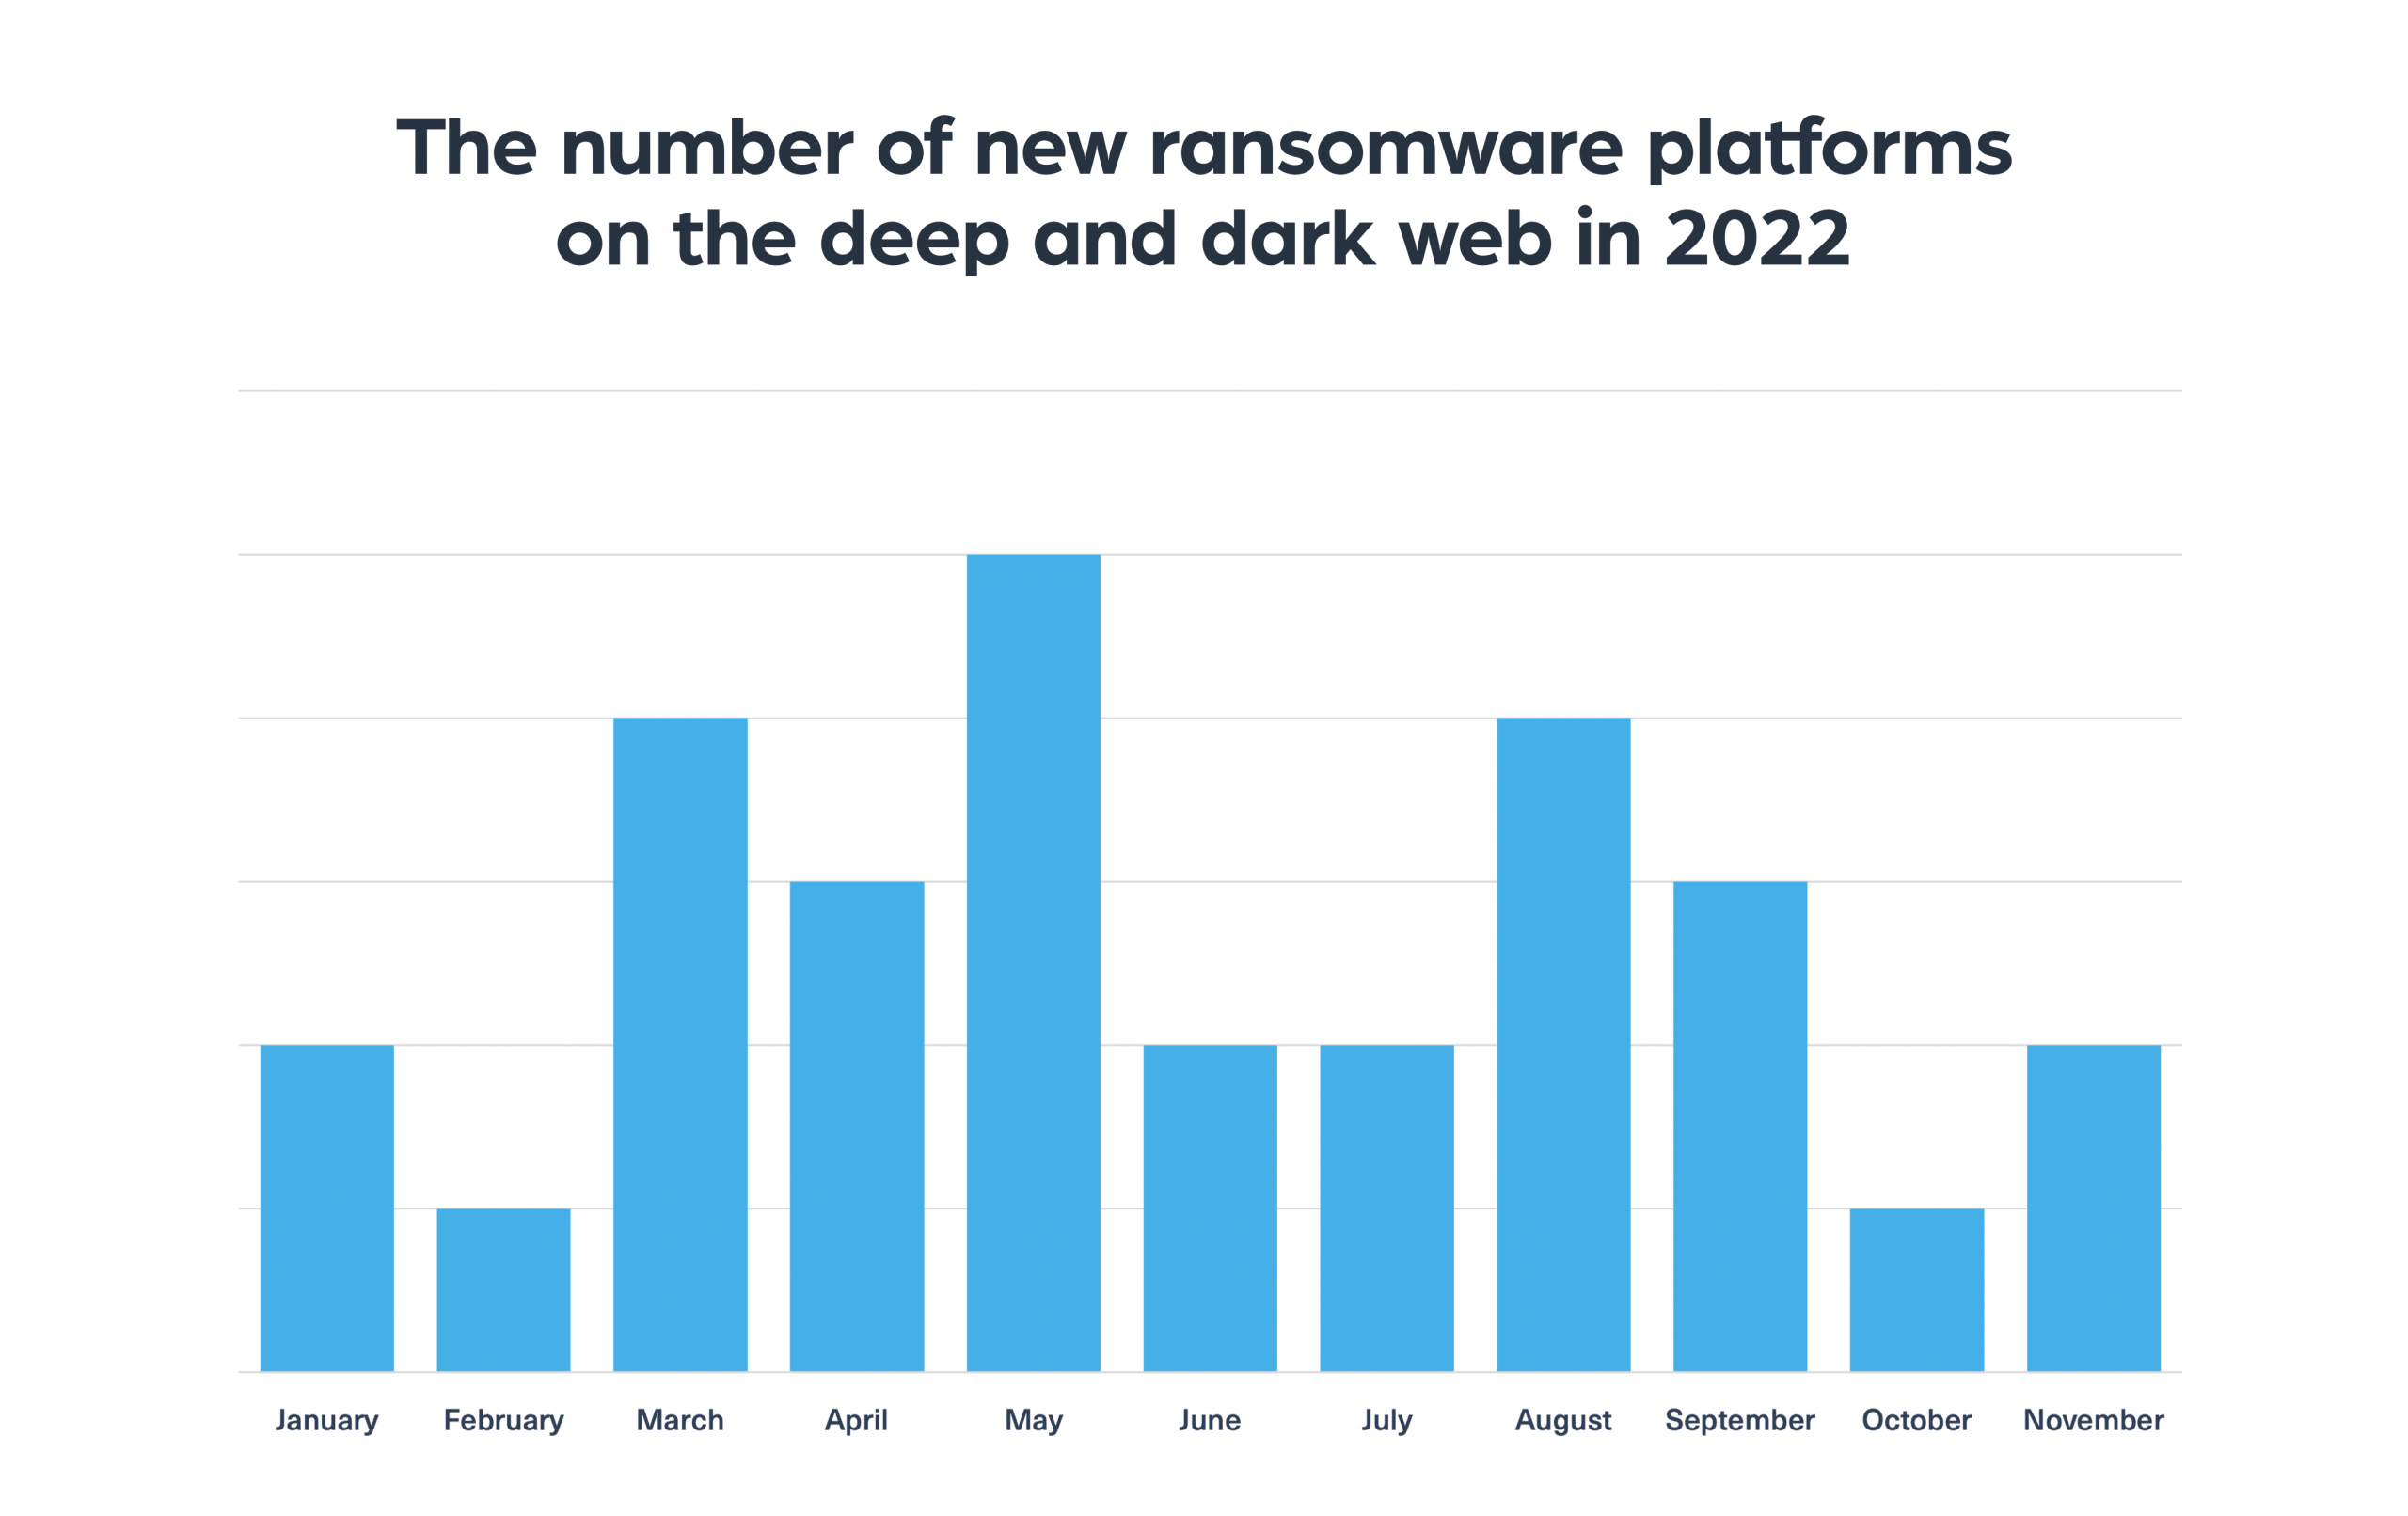 The number of new ransomware platforms on the deep and dark web in 2022